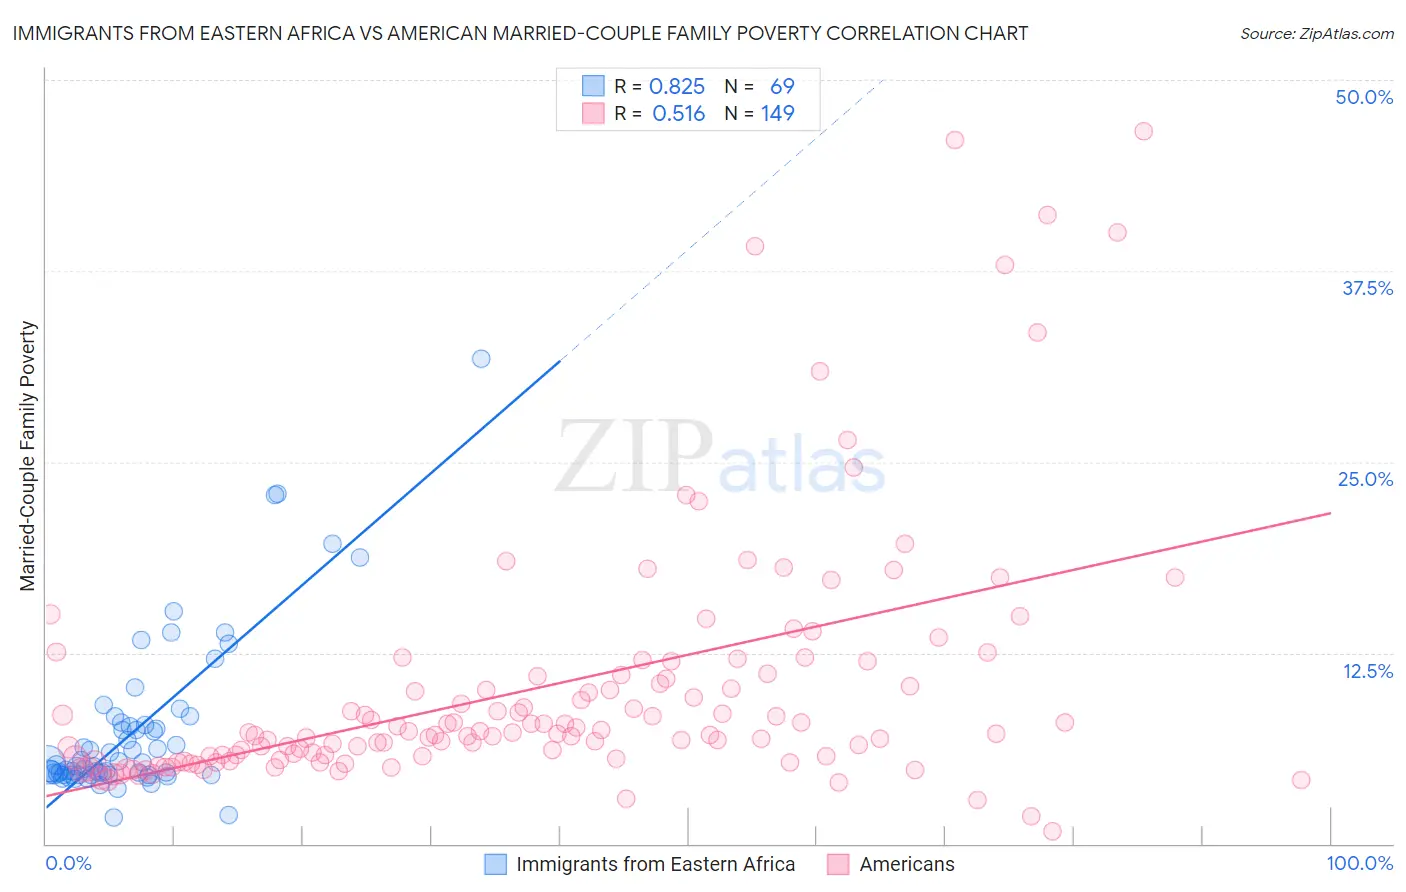 Immigrants from Eastern Africa vs American Married-Couple Family Poverty